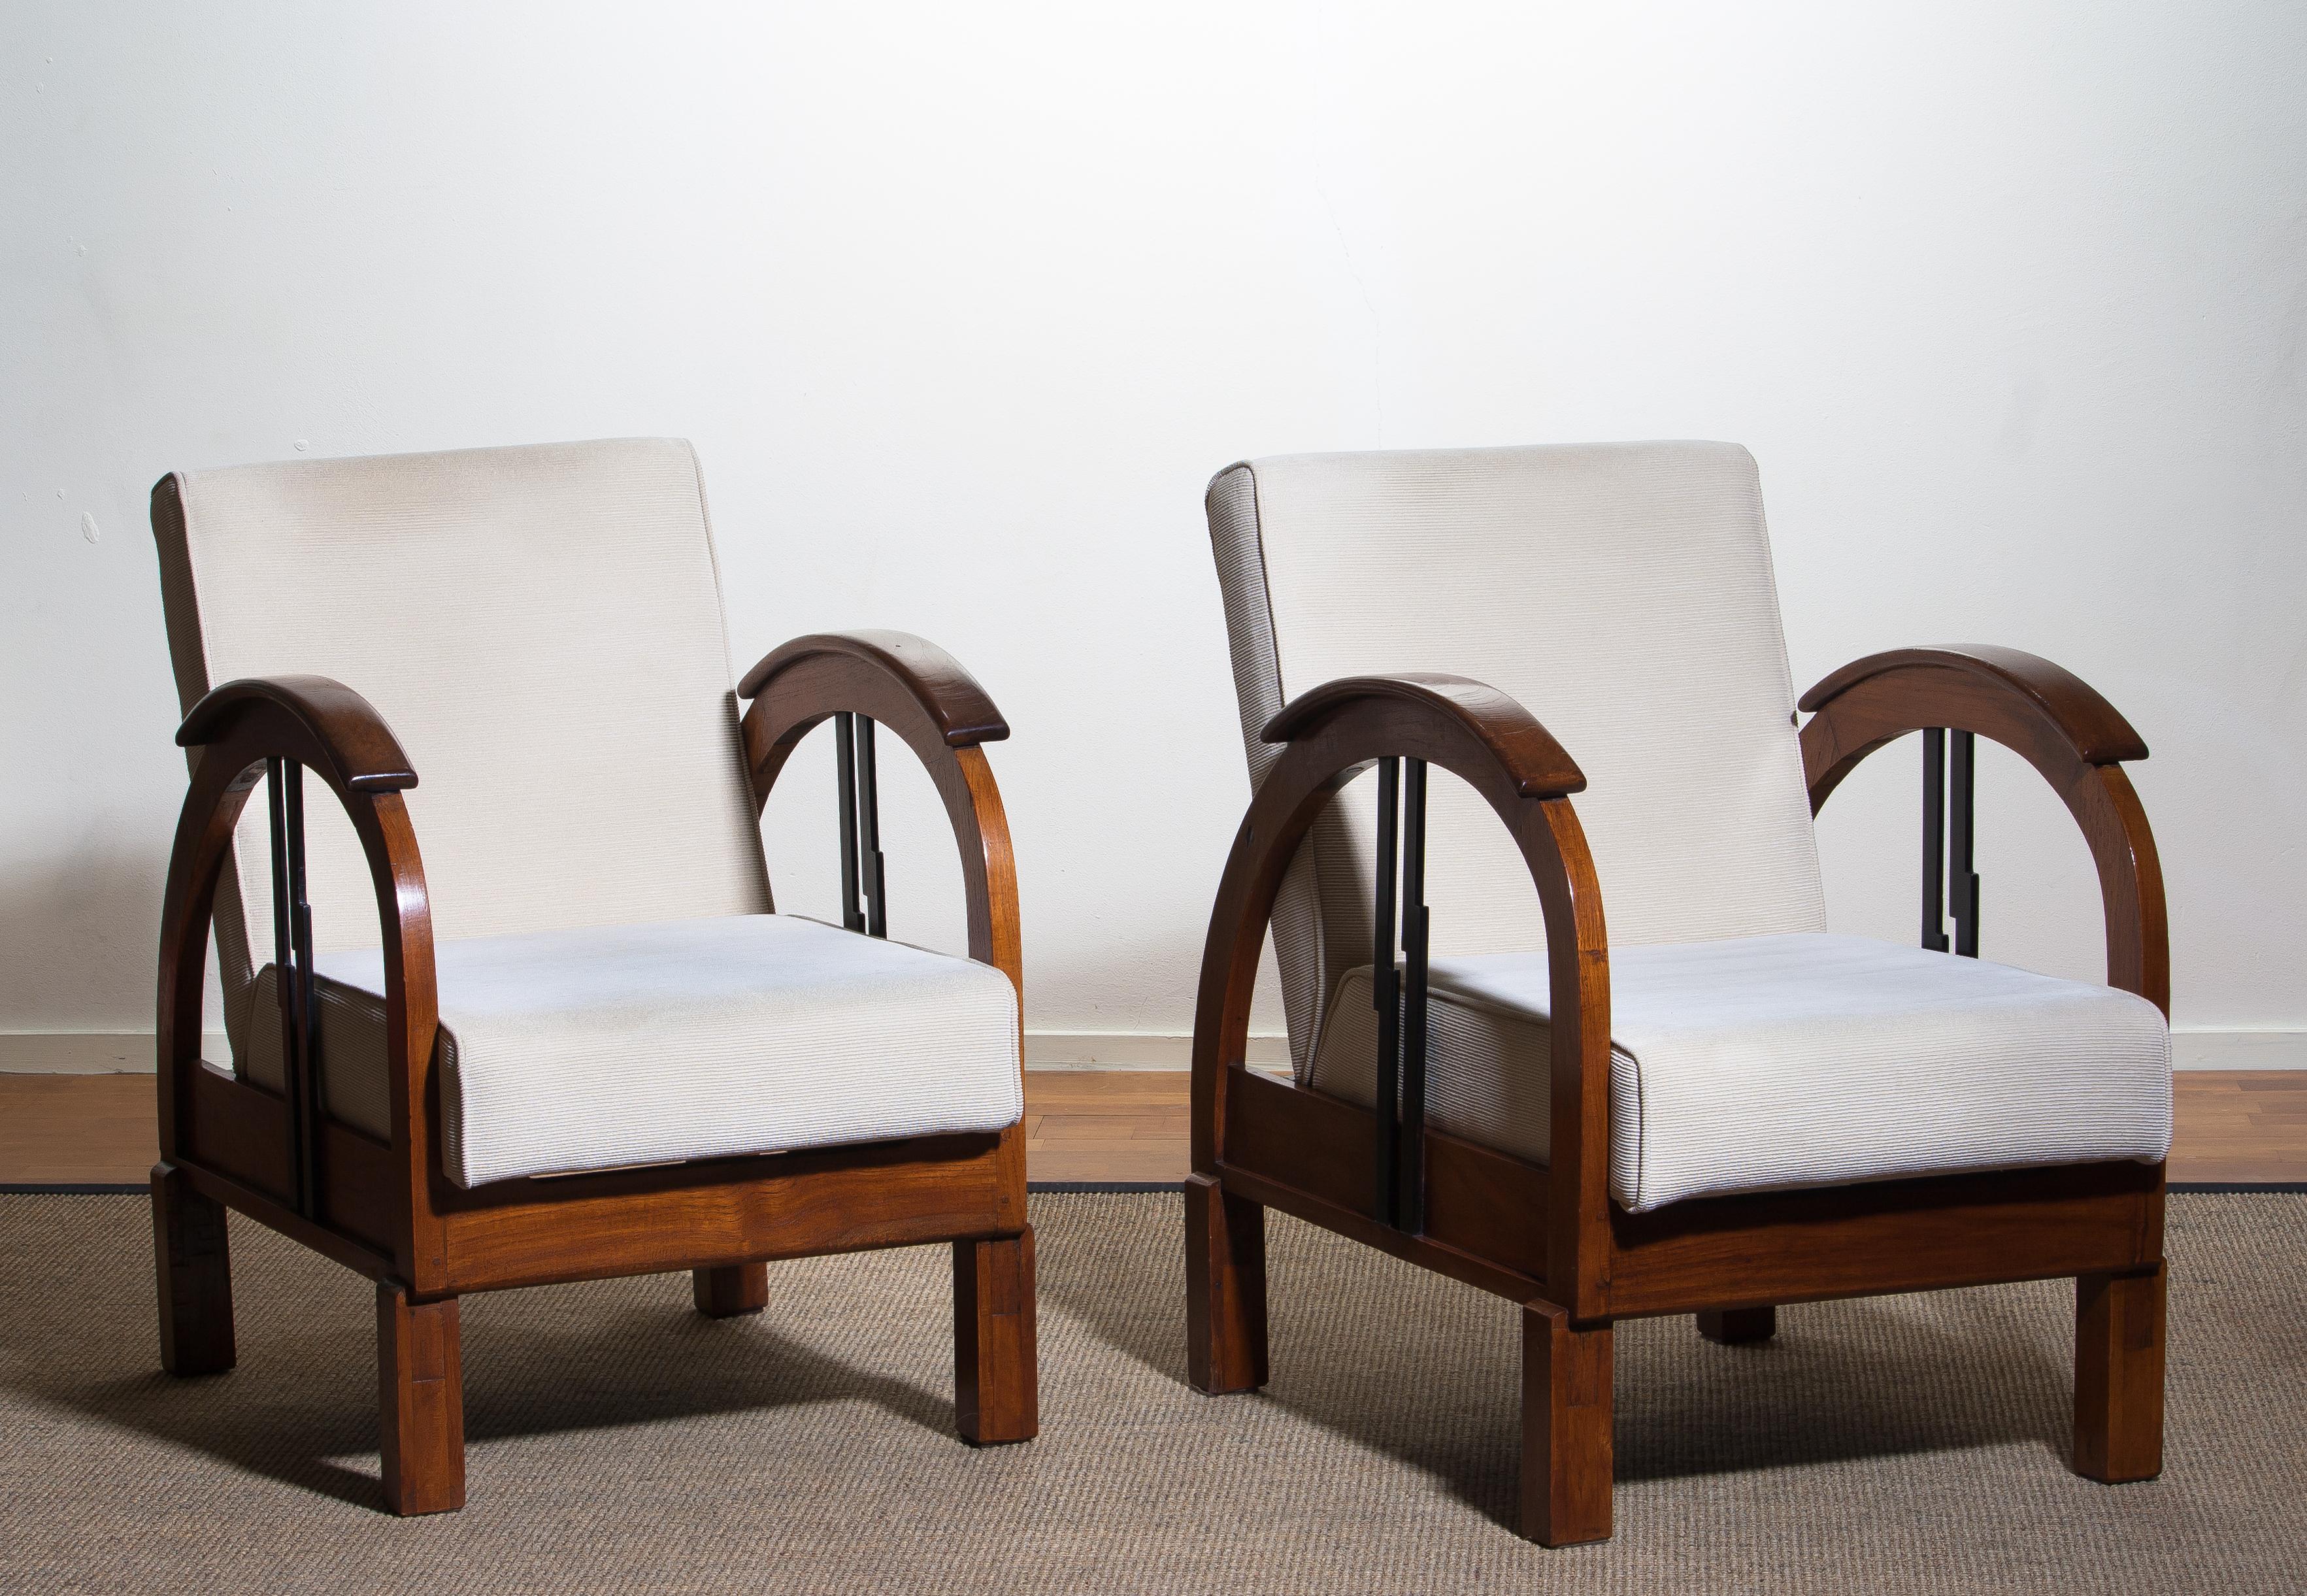 Beautiful pair of Art Deco club lounge armchairs .
The chairs are made of oak with a later off-white corded fabric.
They are both in wonderful condition.